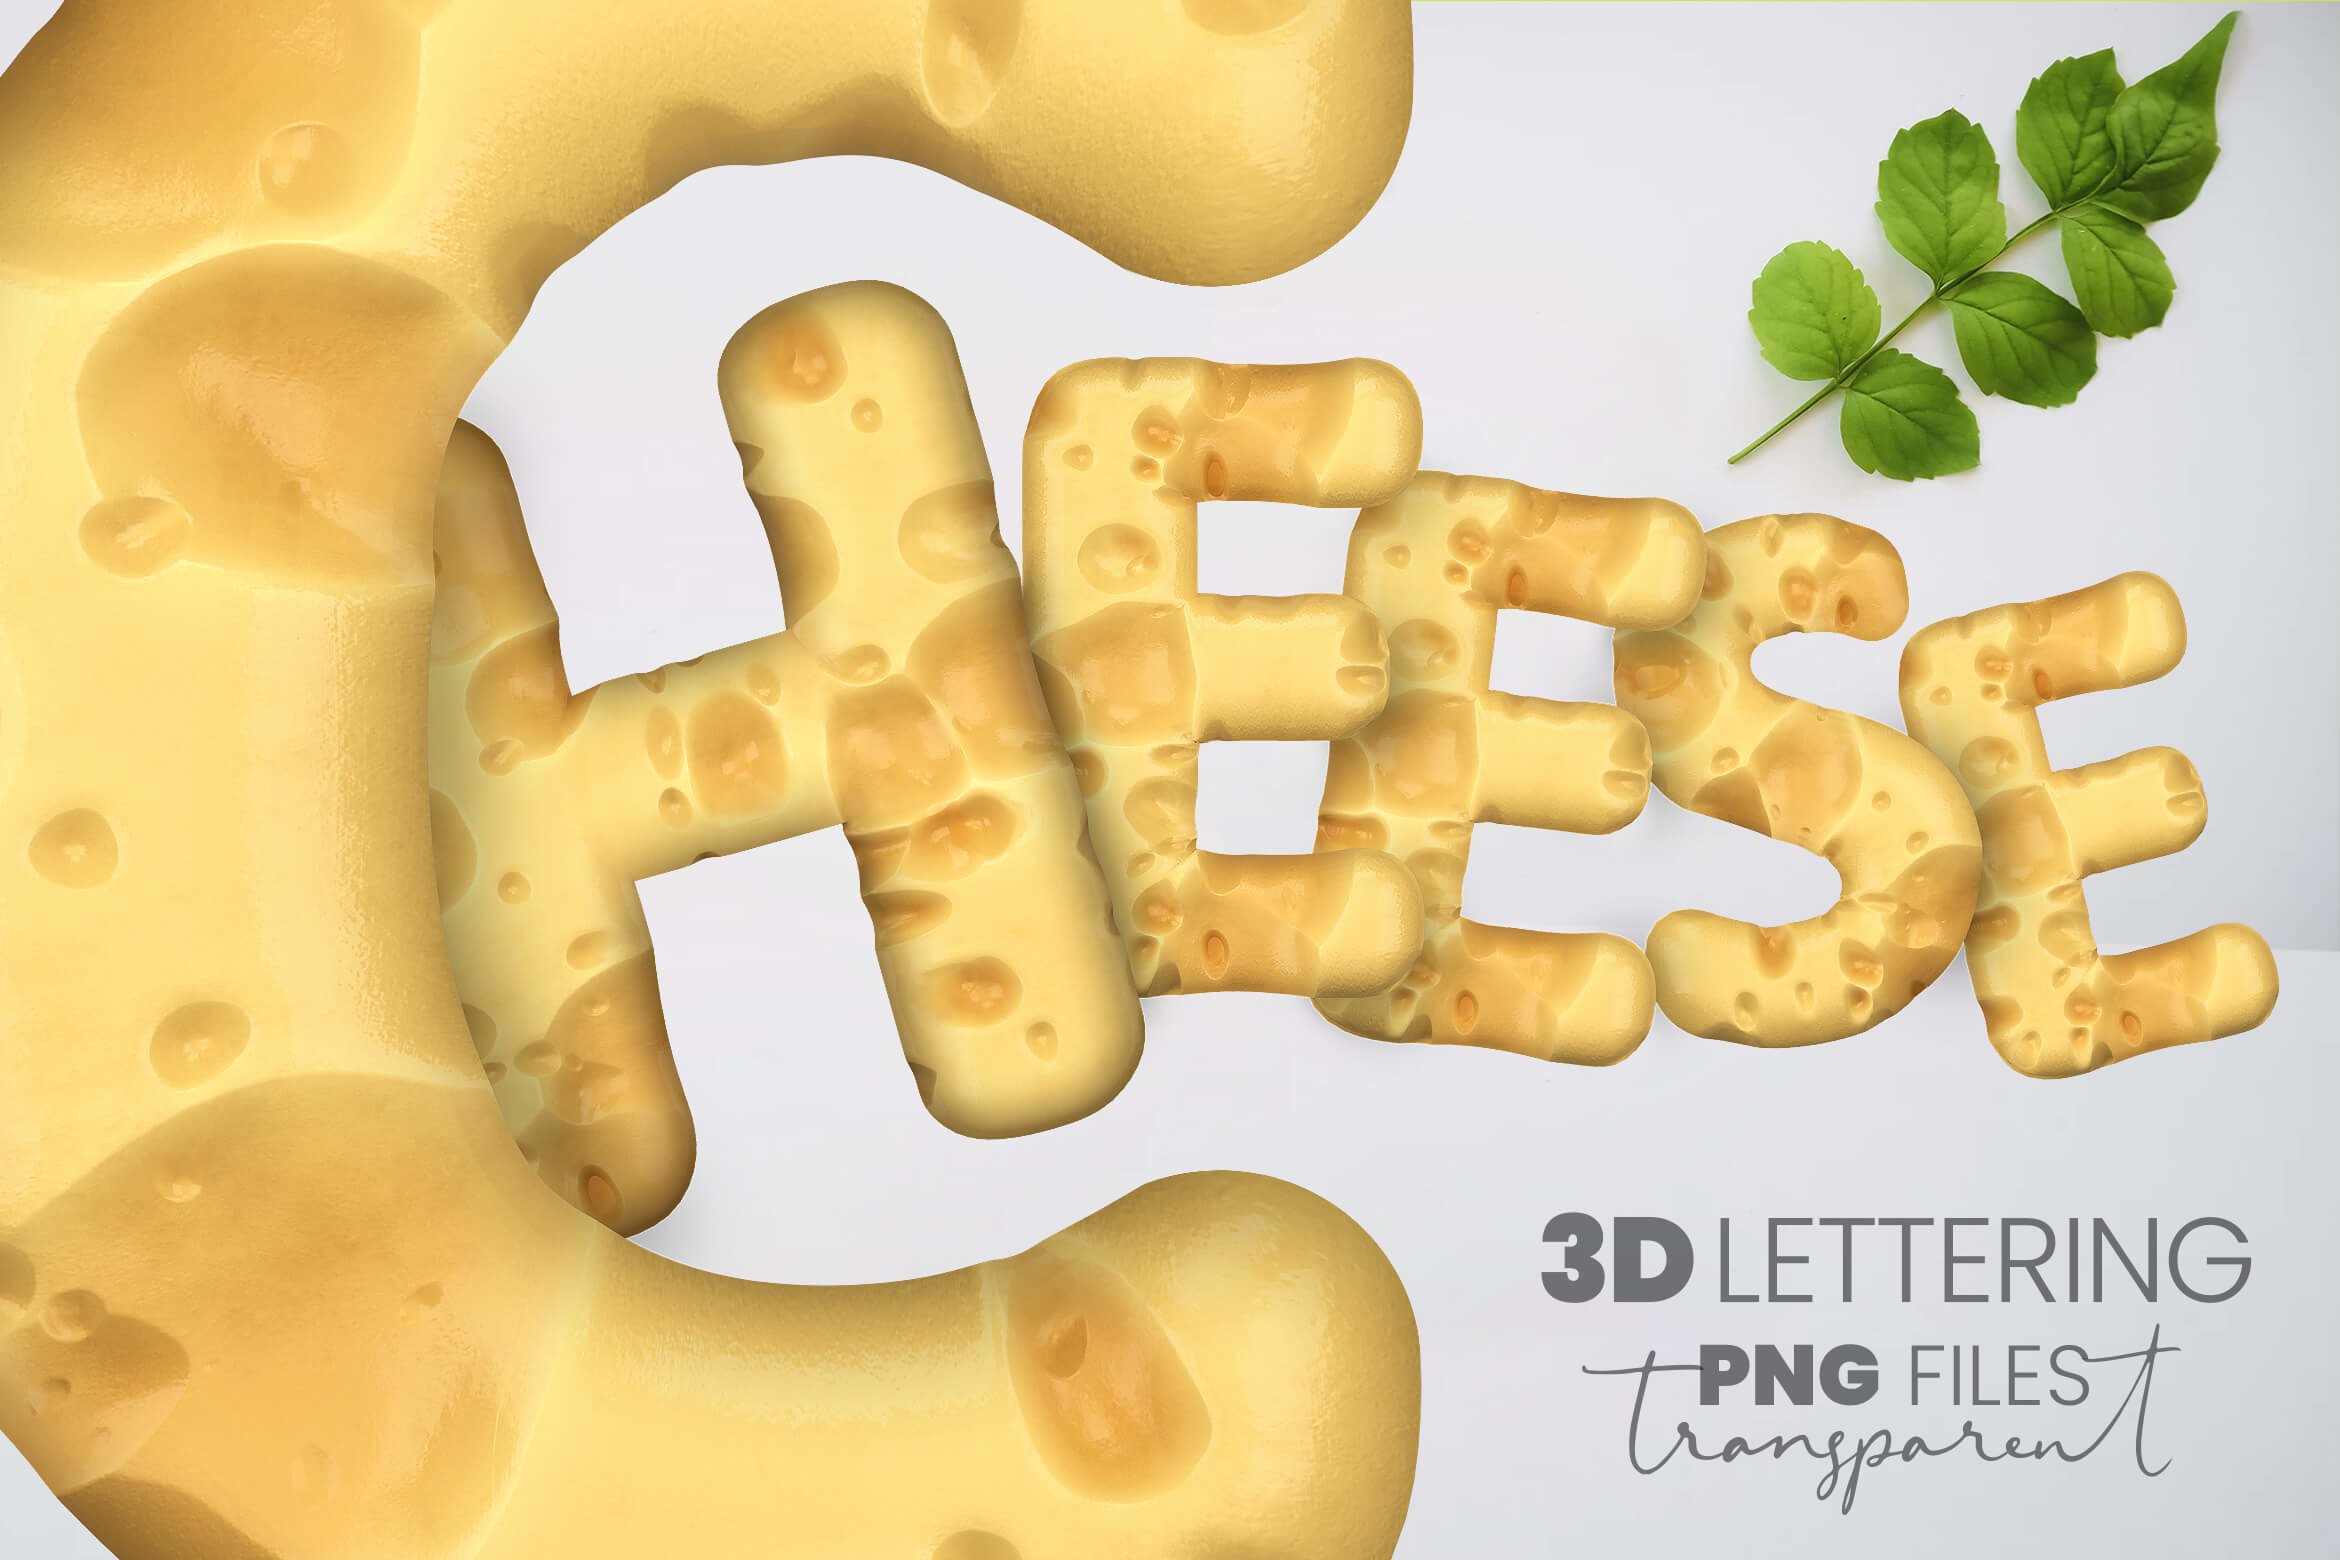 Gorgeous rendering of 3D Swiss cheese lettering.